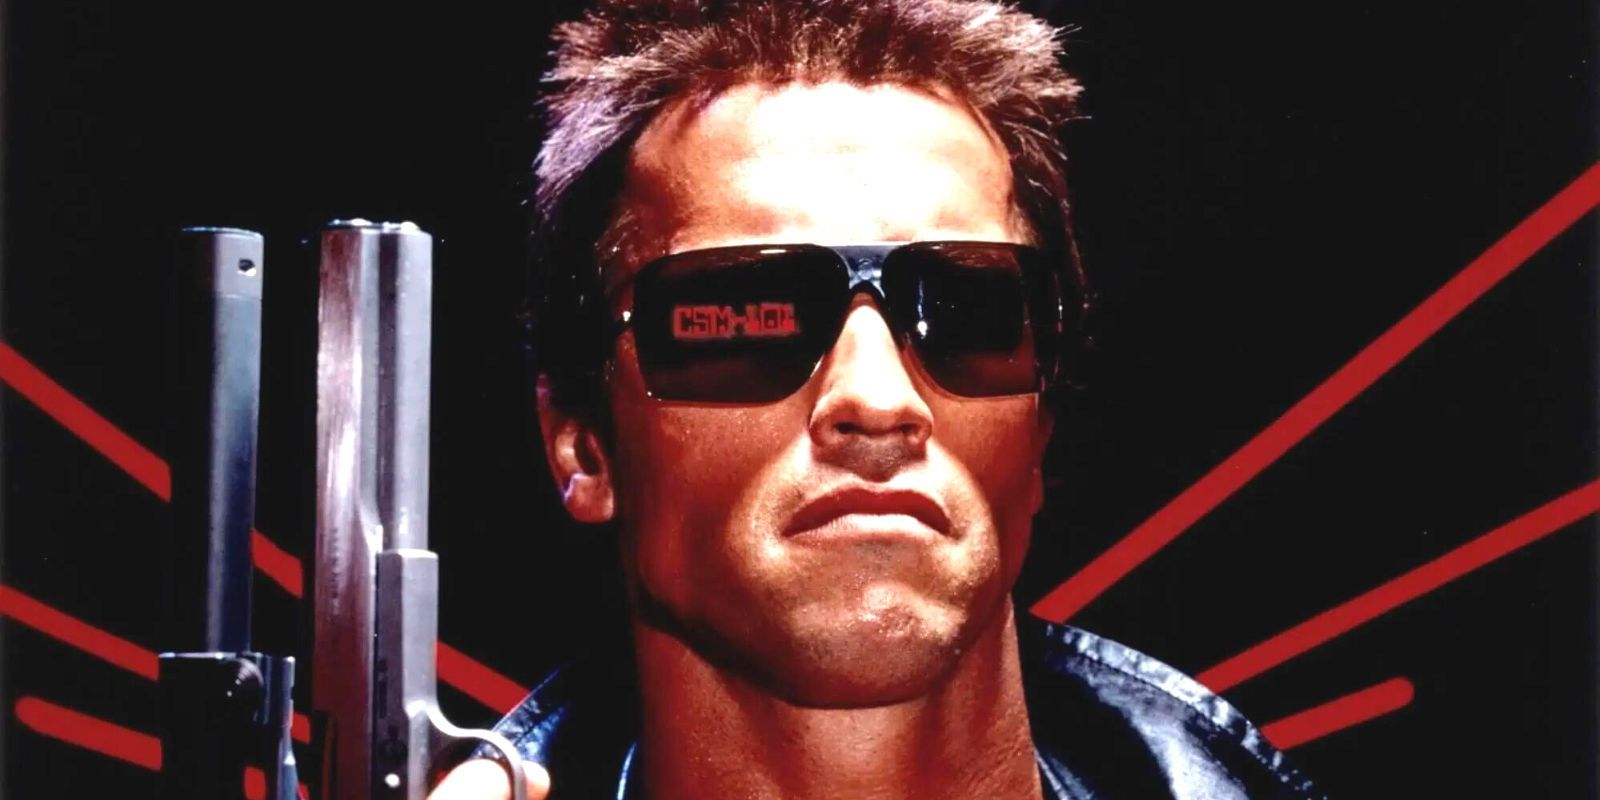 Arnold Schwarzenegger as the Terminator with massive shades and a pistol